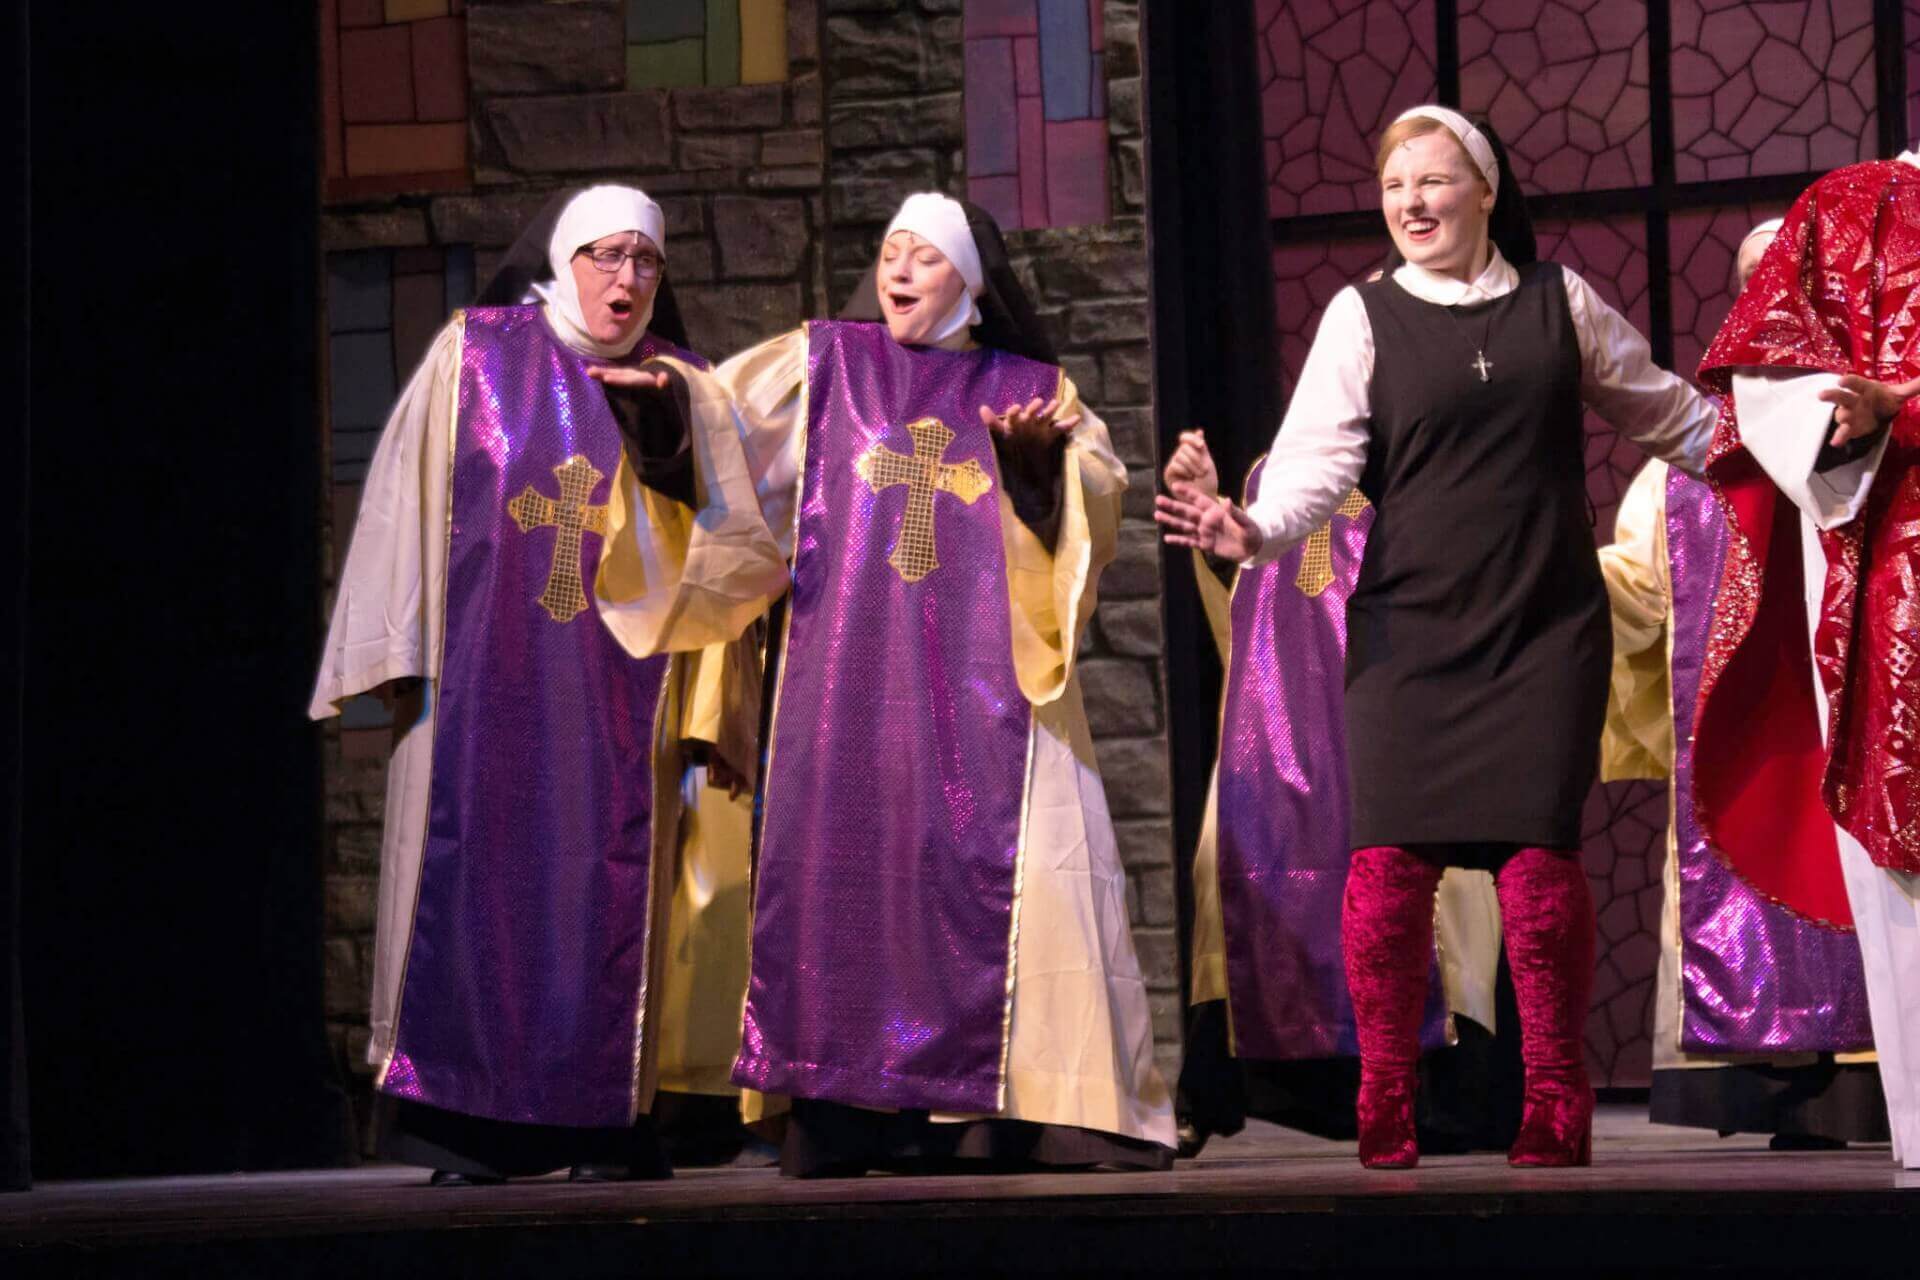 Tina and Michelle Back-up Dancers - Sister Act Costume Rental pictures - Stagecraft Theatrical